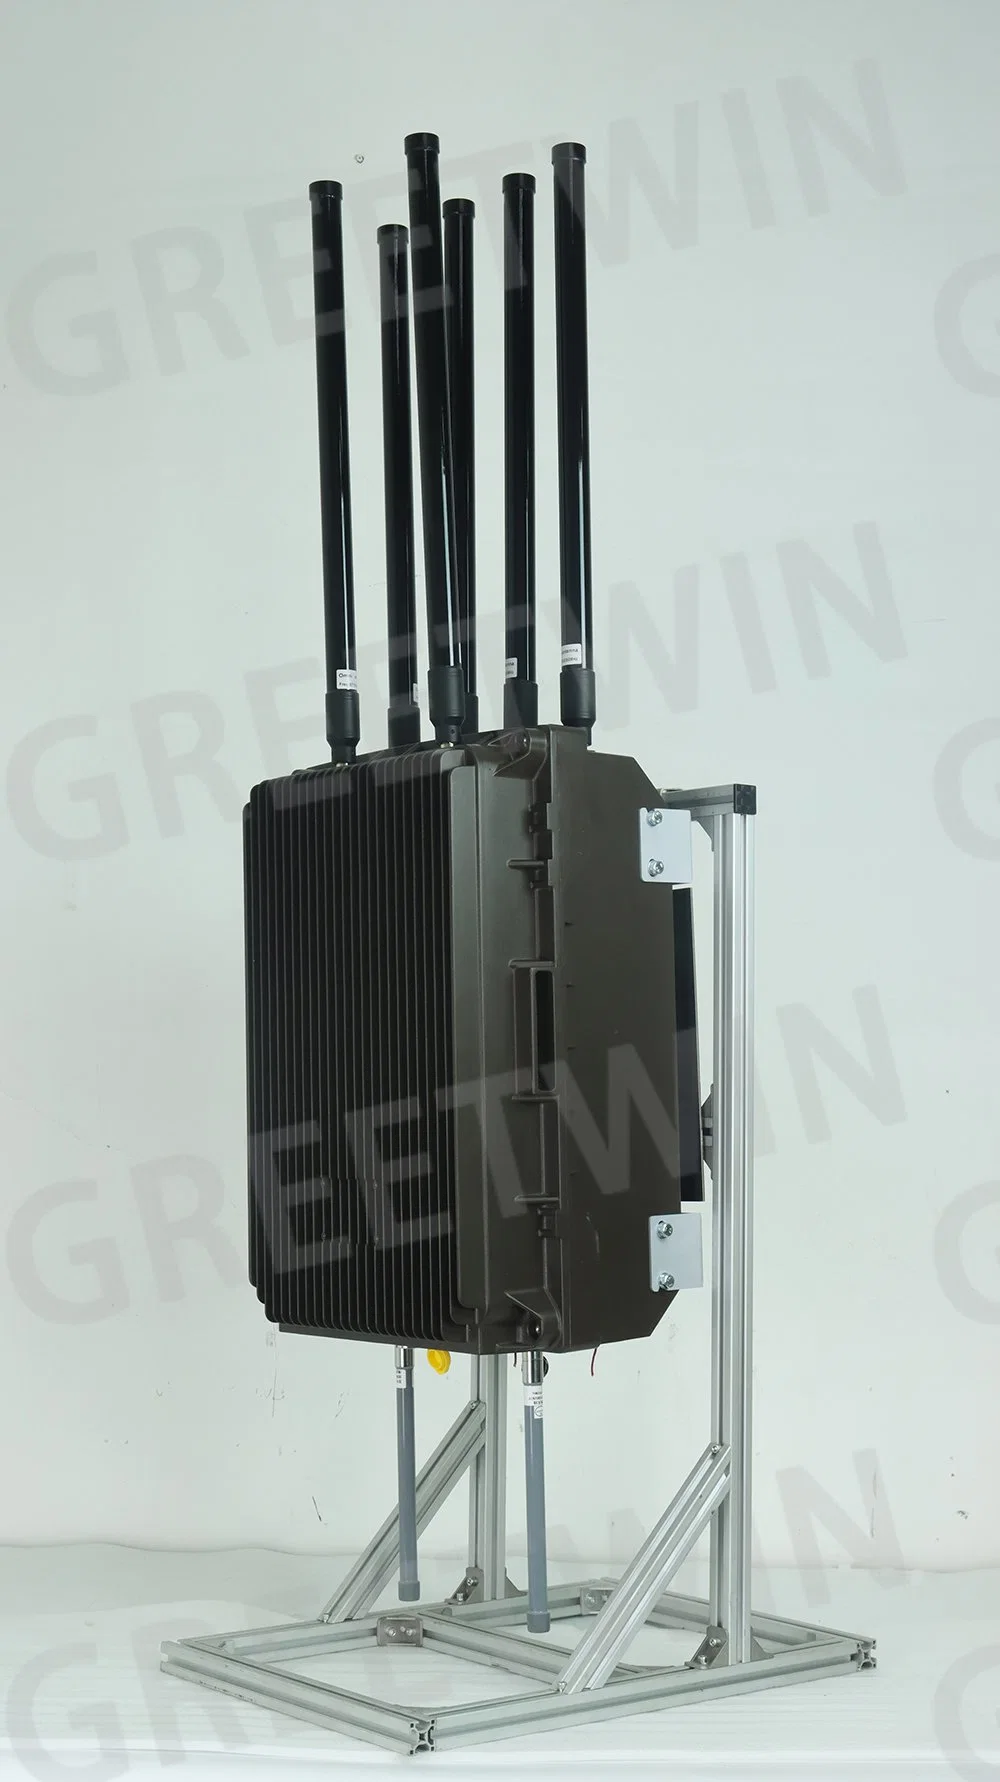 Uav Long Range Detection and Jamming Integrated System Anti-Drone Jammer &amp; Detector